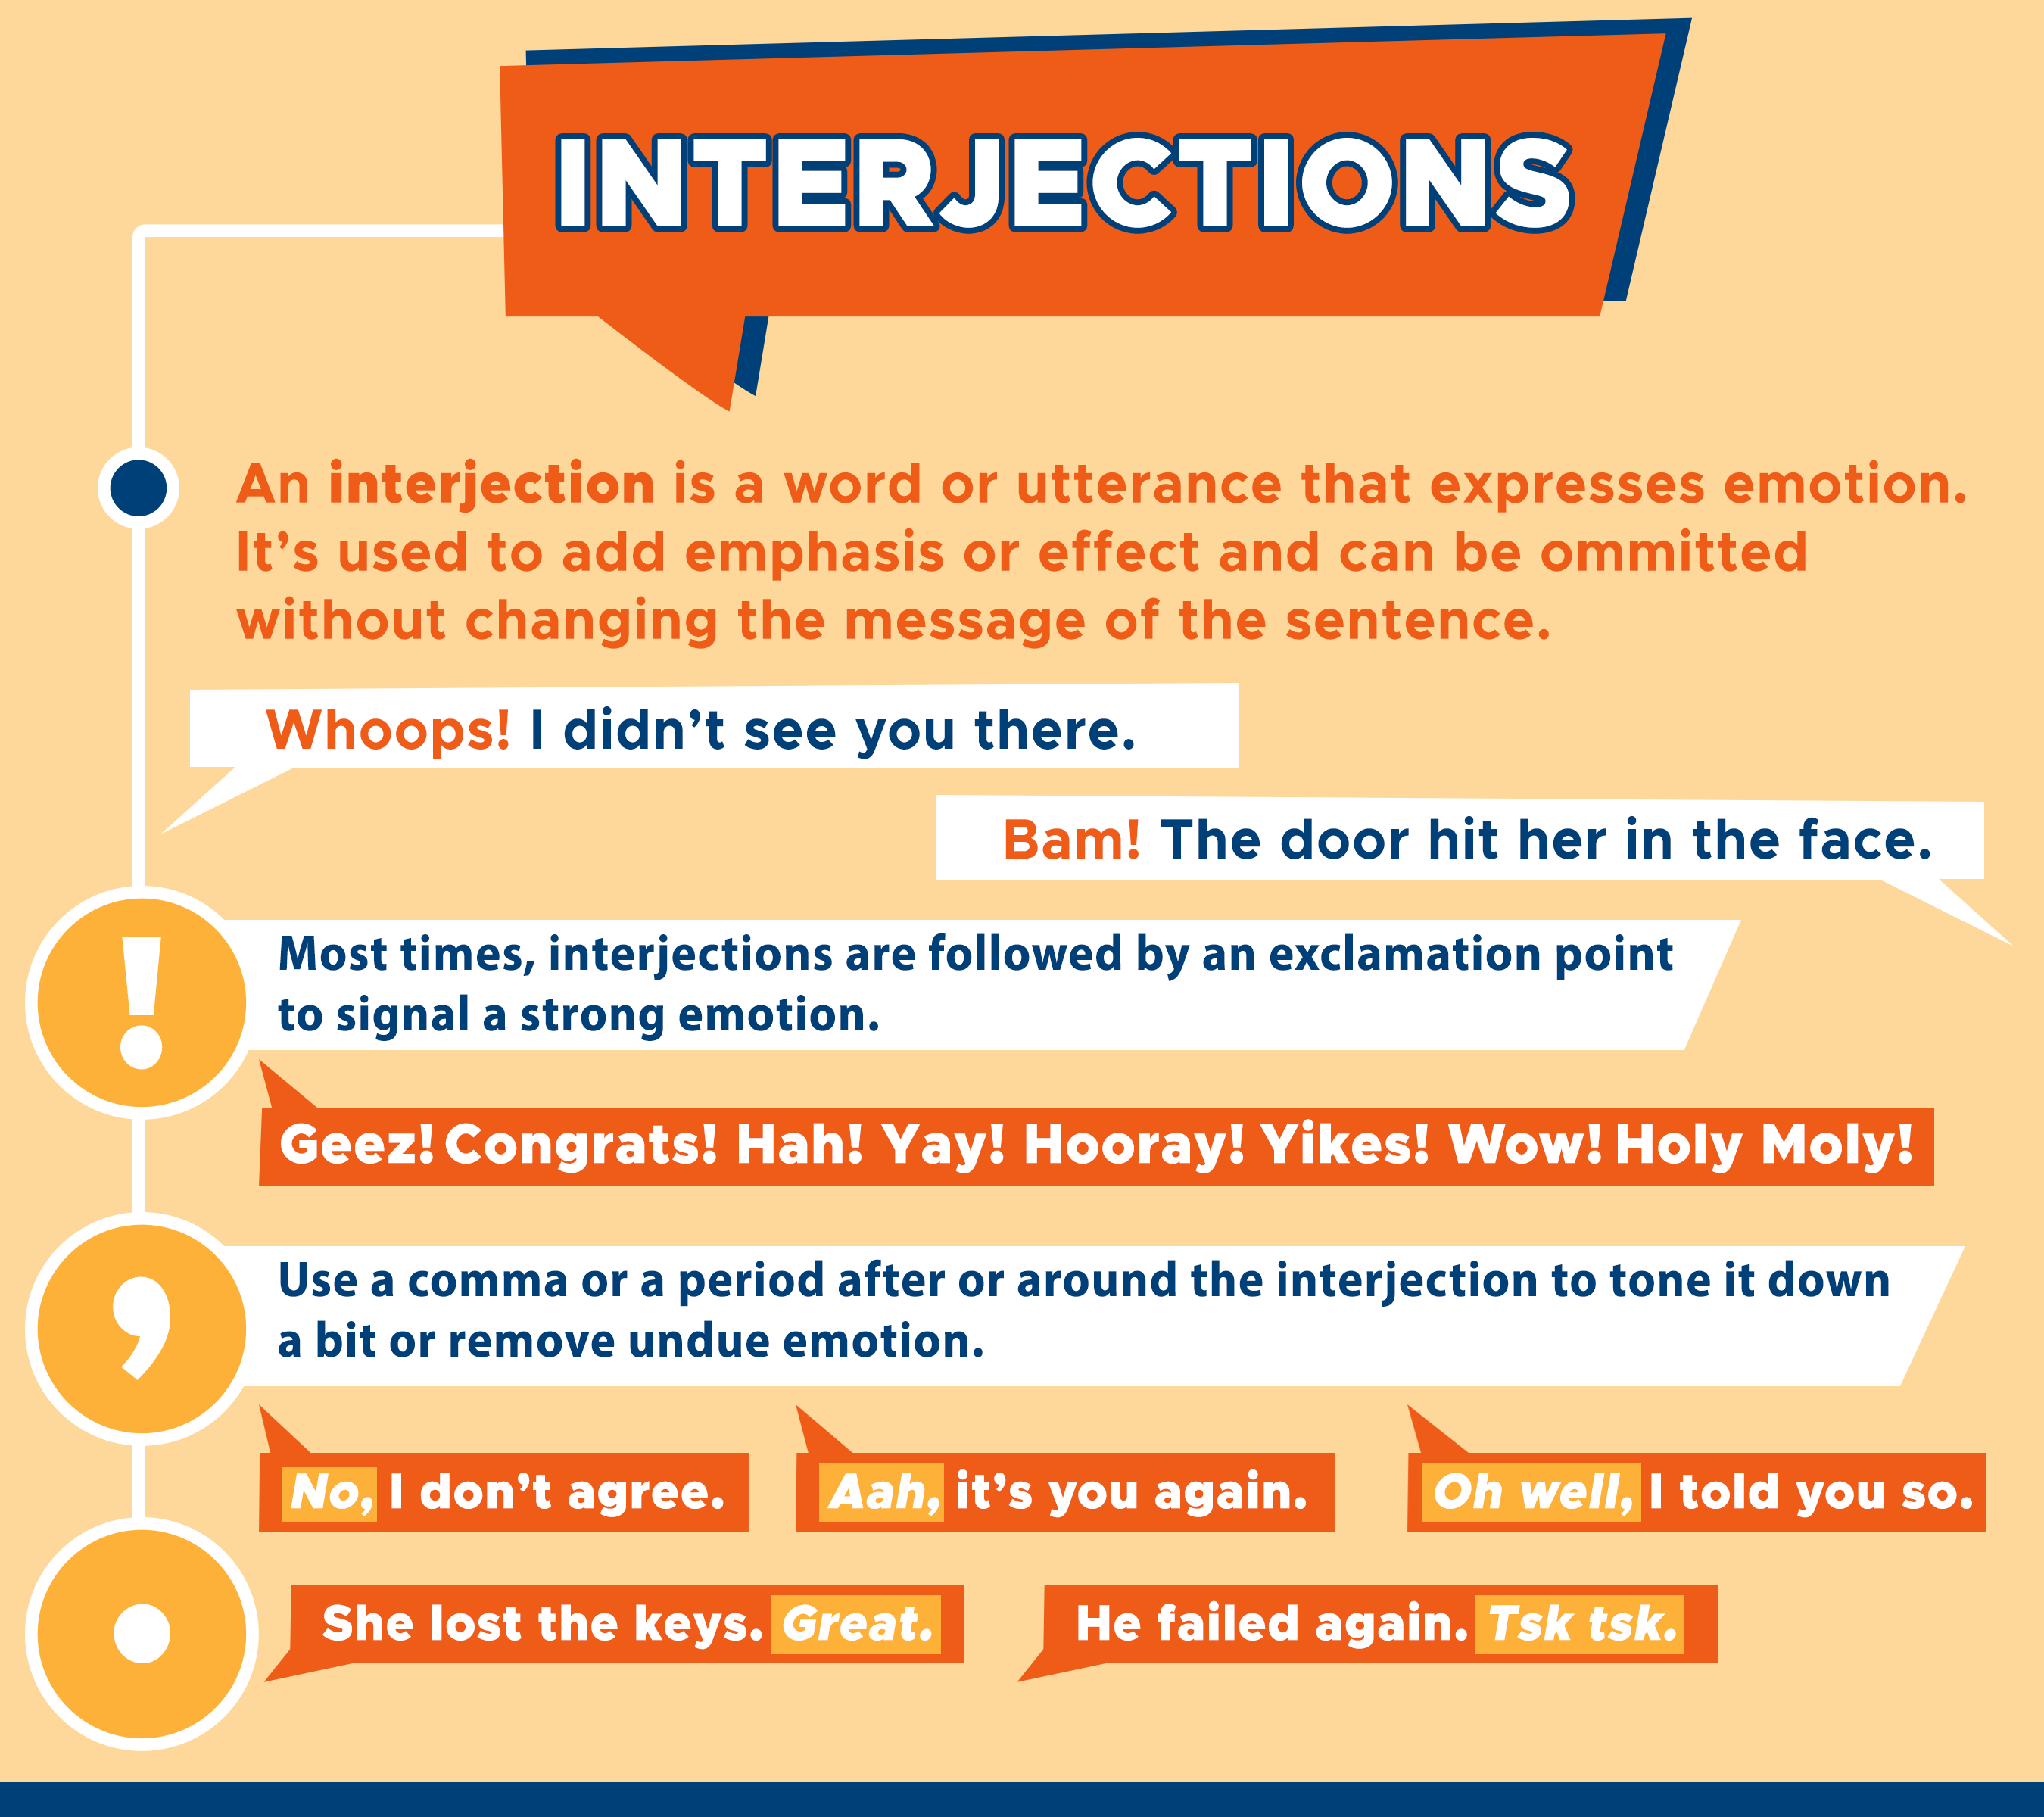 what is the interjection